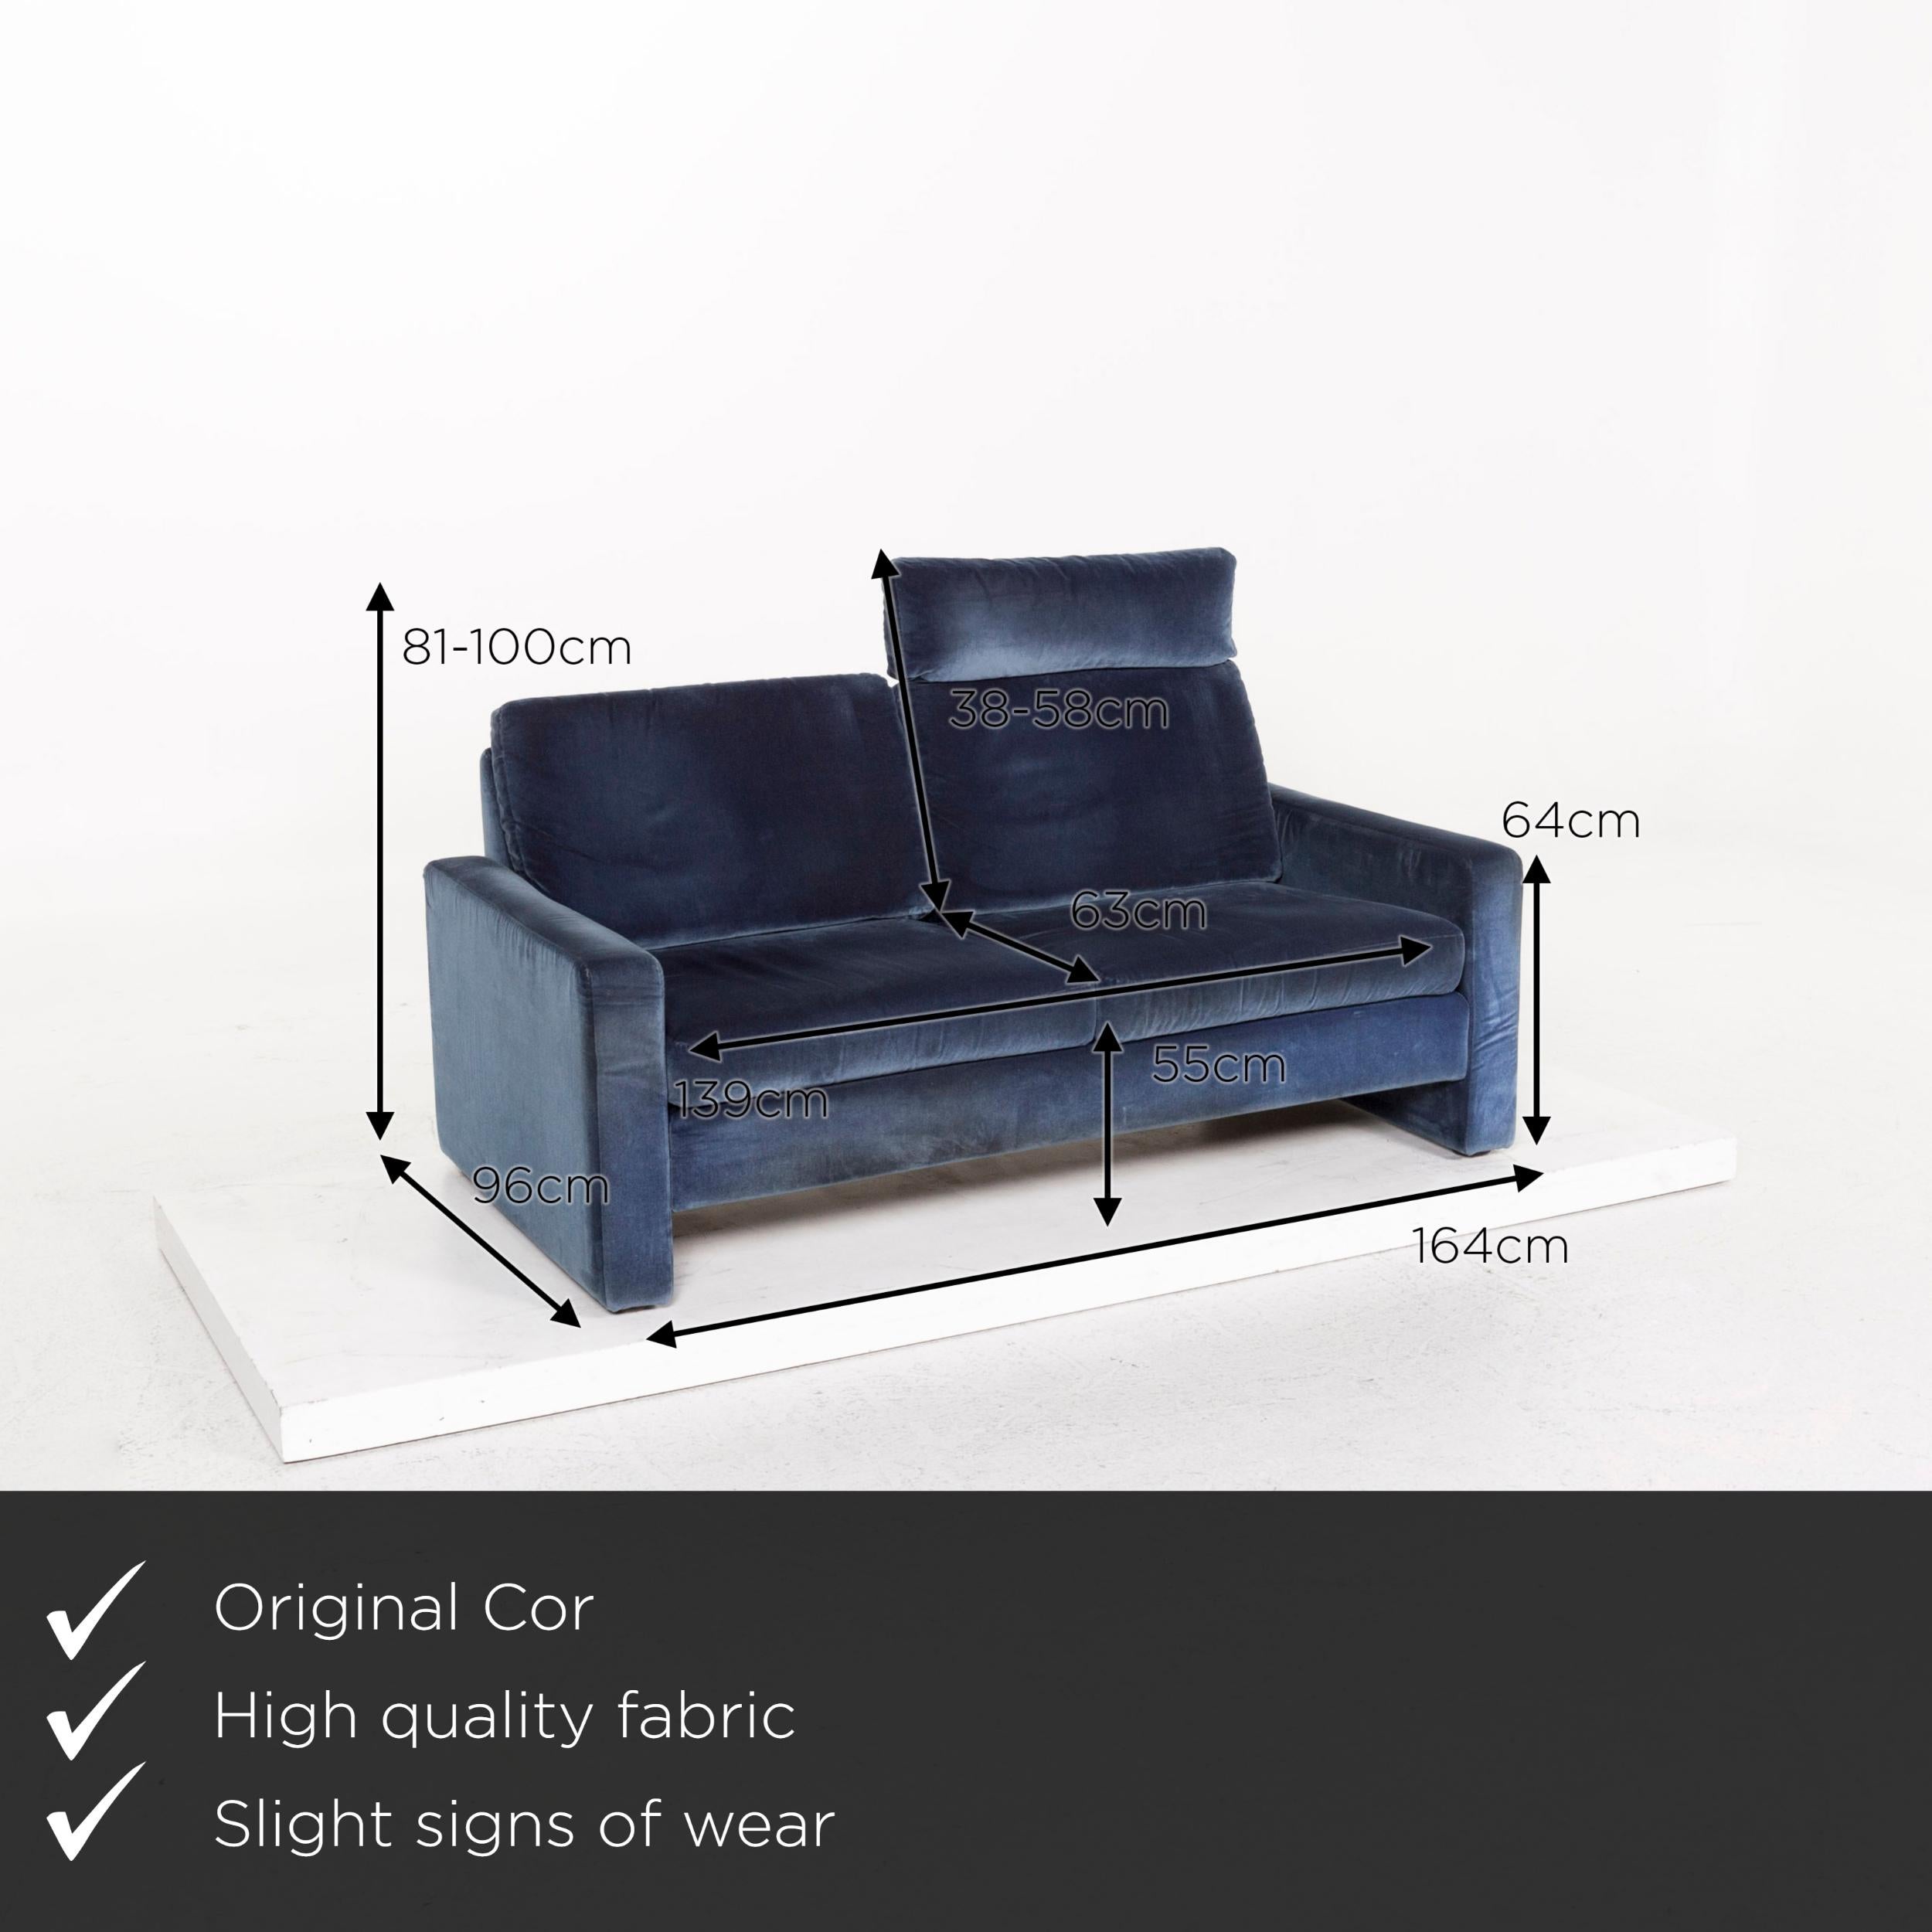 We present to you a COR Conseta fabric sofa blue two-seat function couch.
   
 

 Product measurements in centimeters:
 

Depth 96
Width 164
Height 81
Seat height 55
Rest height 64
Seat depth 63
Seat width 139
Back height 38.
   